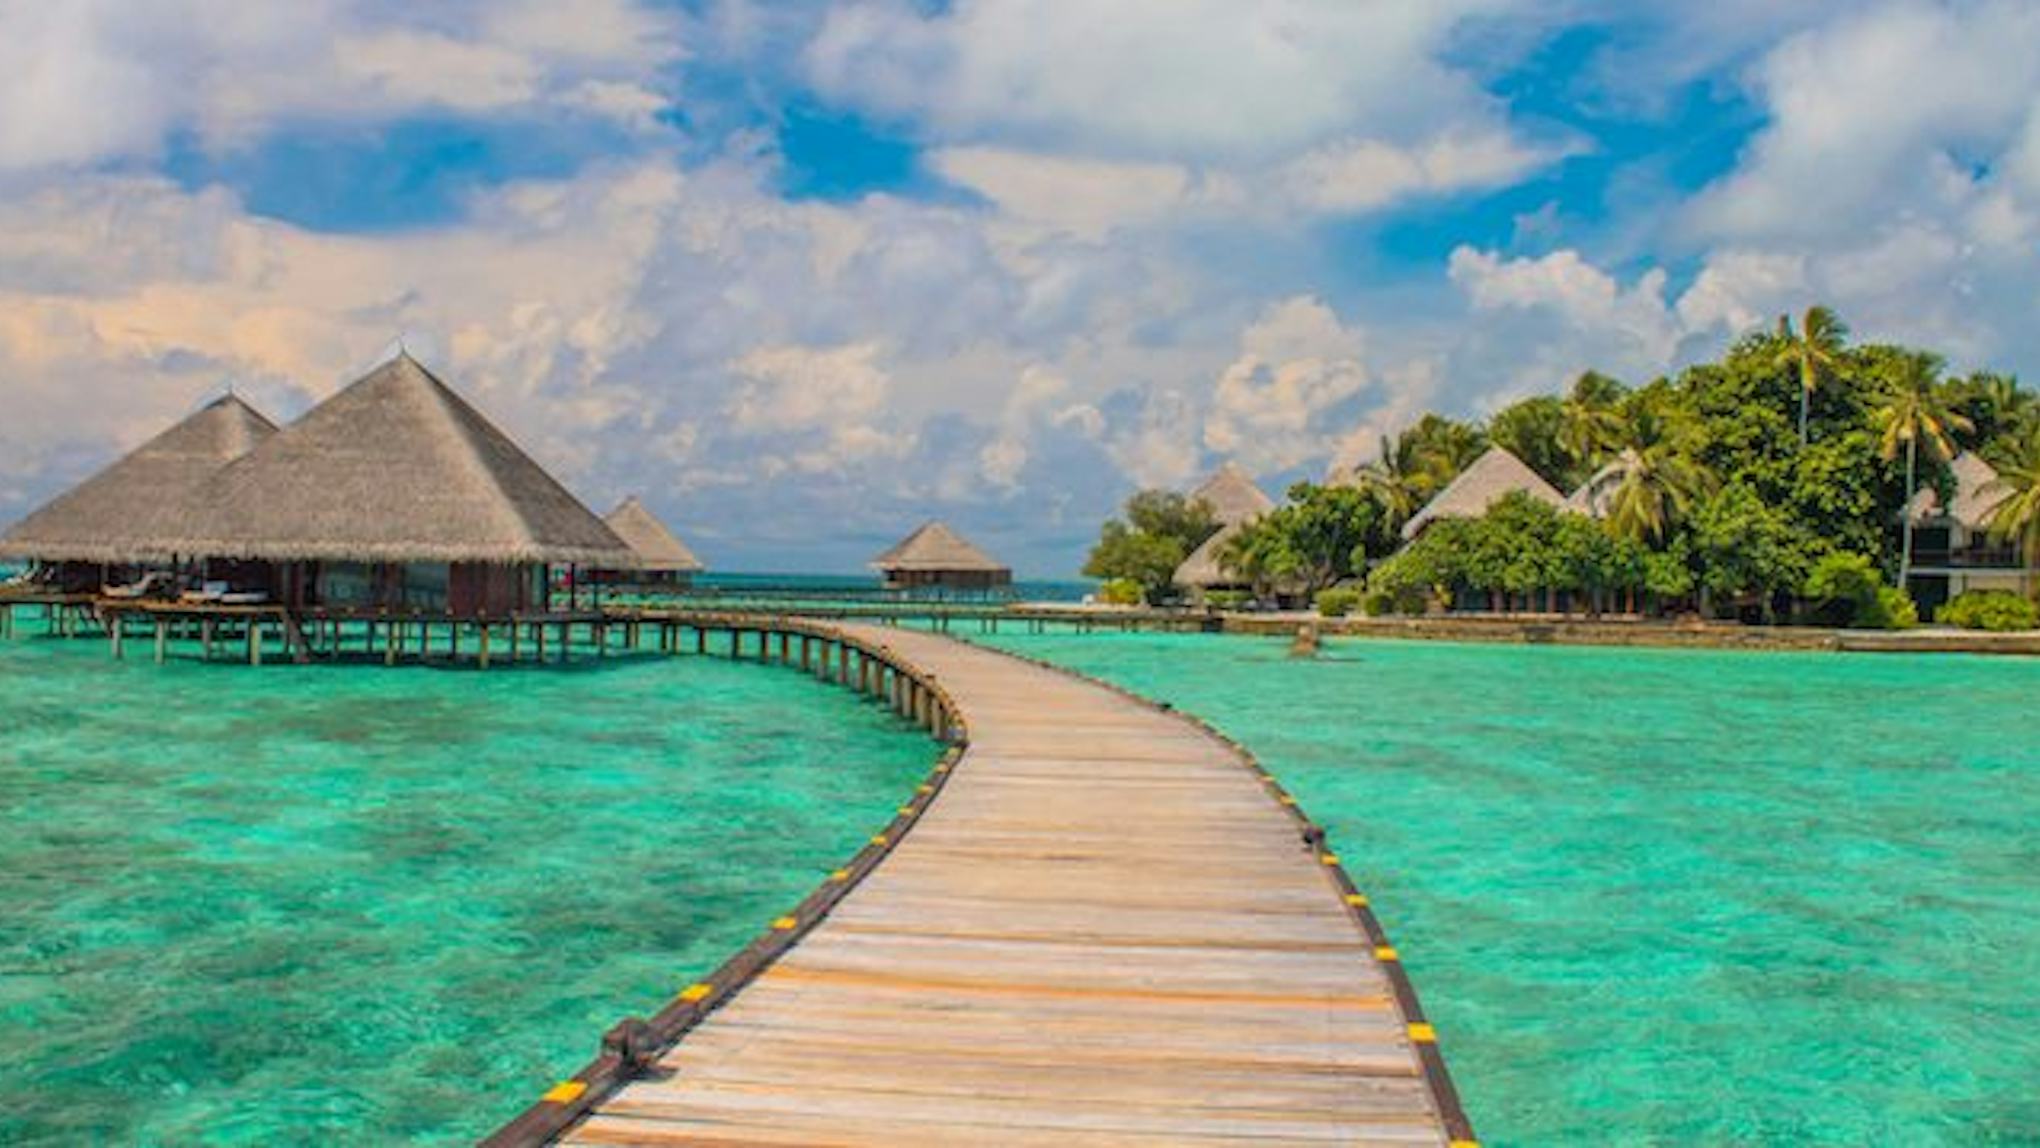 Tropical Islands To Visit If You're On A Budget